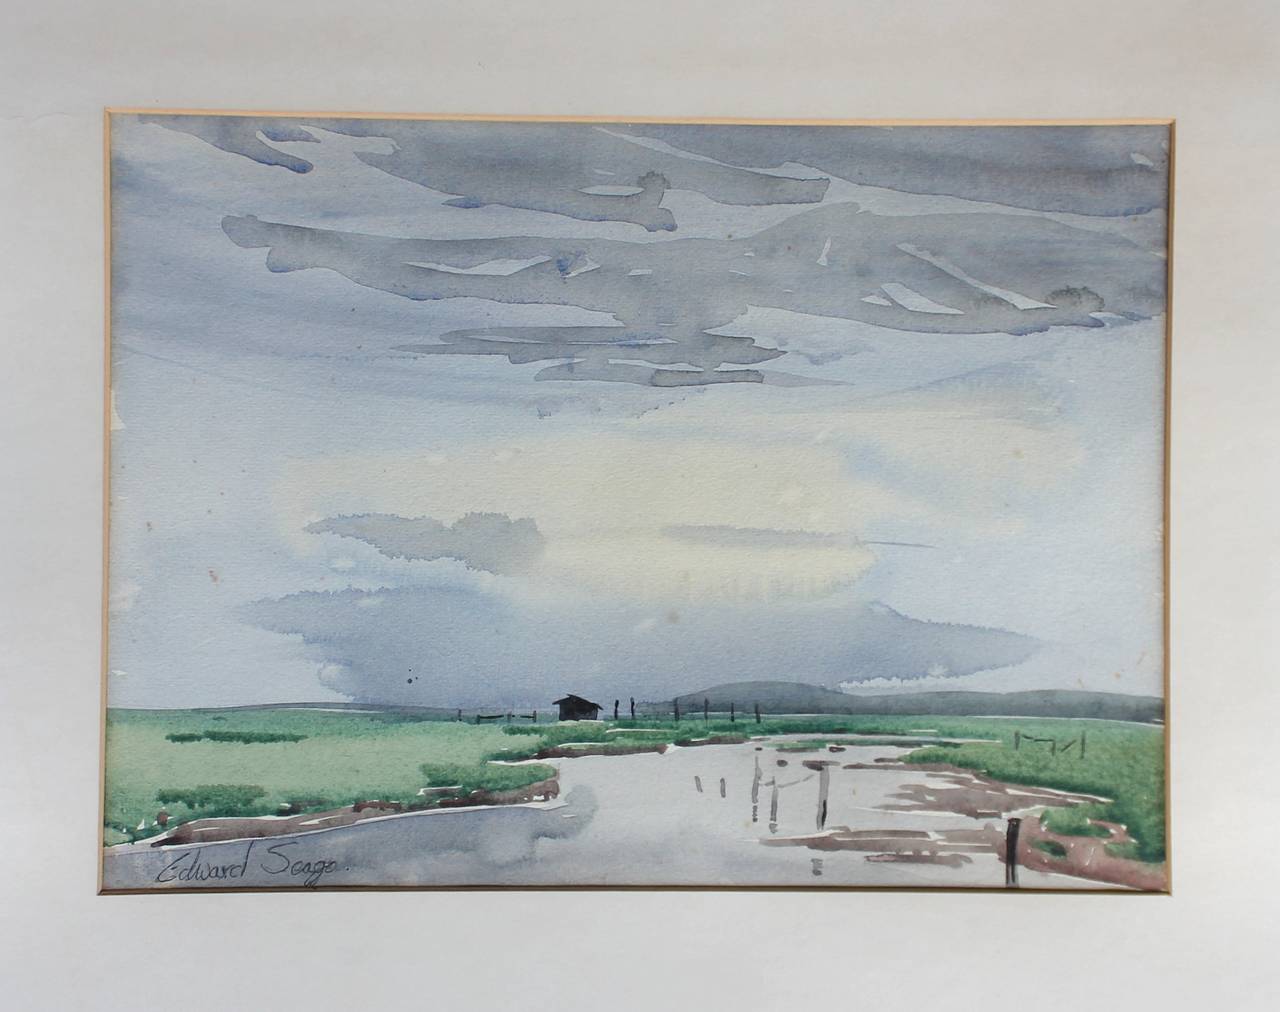 A watercolor by Edward Seago RWS, RBA, (1910-1974).

Signed lower left and in its original painted frame. When taking it out of the frame, it has the recipients details in pencil on the reverse of the paper.

Measures: 37cm wide x 27cm high